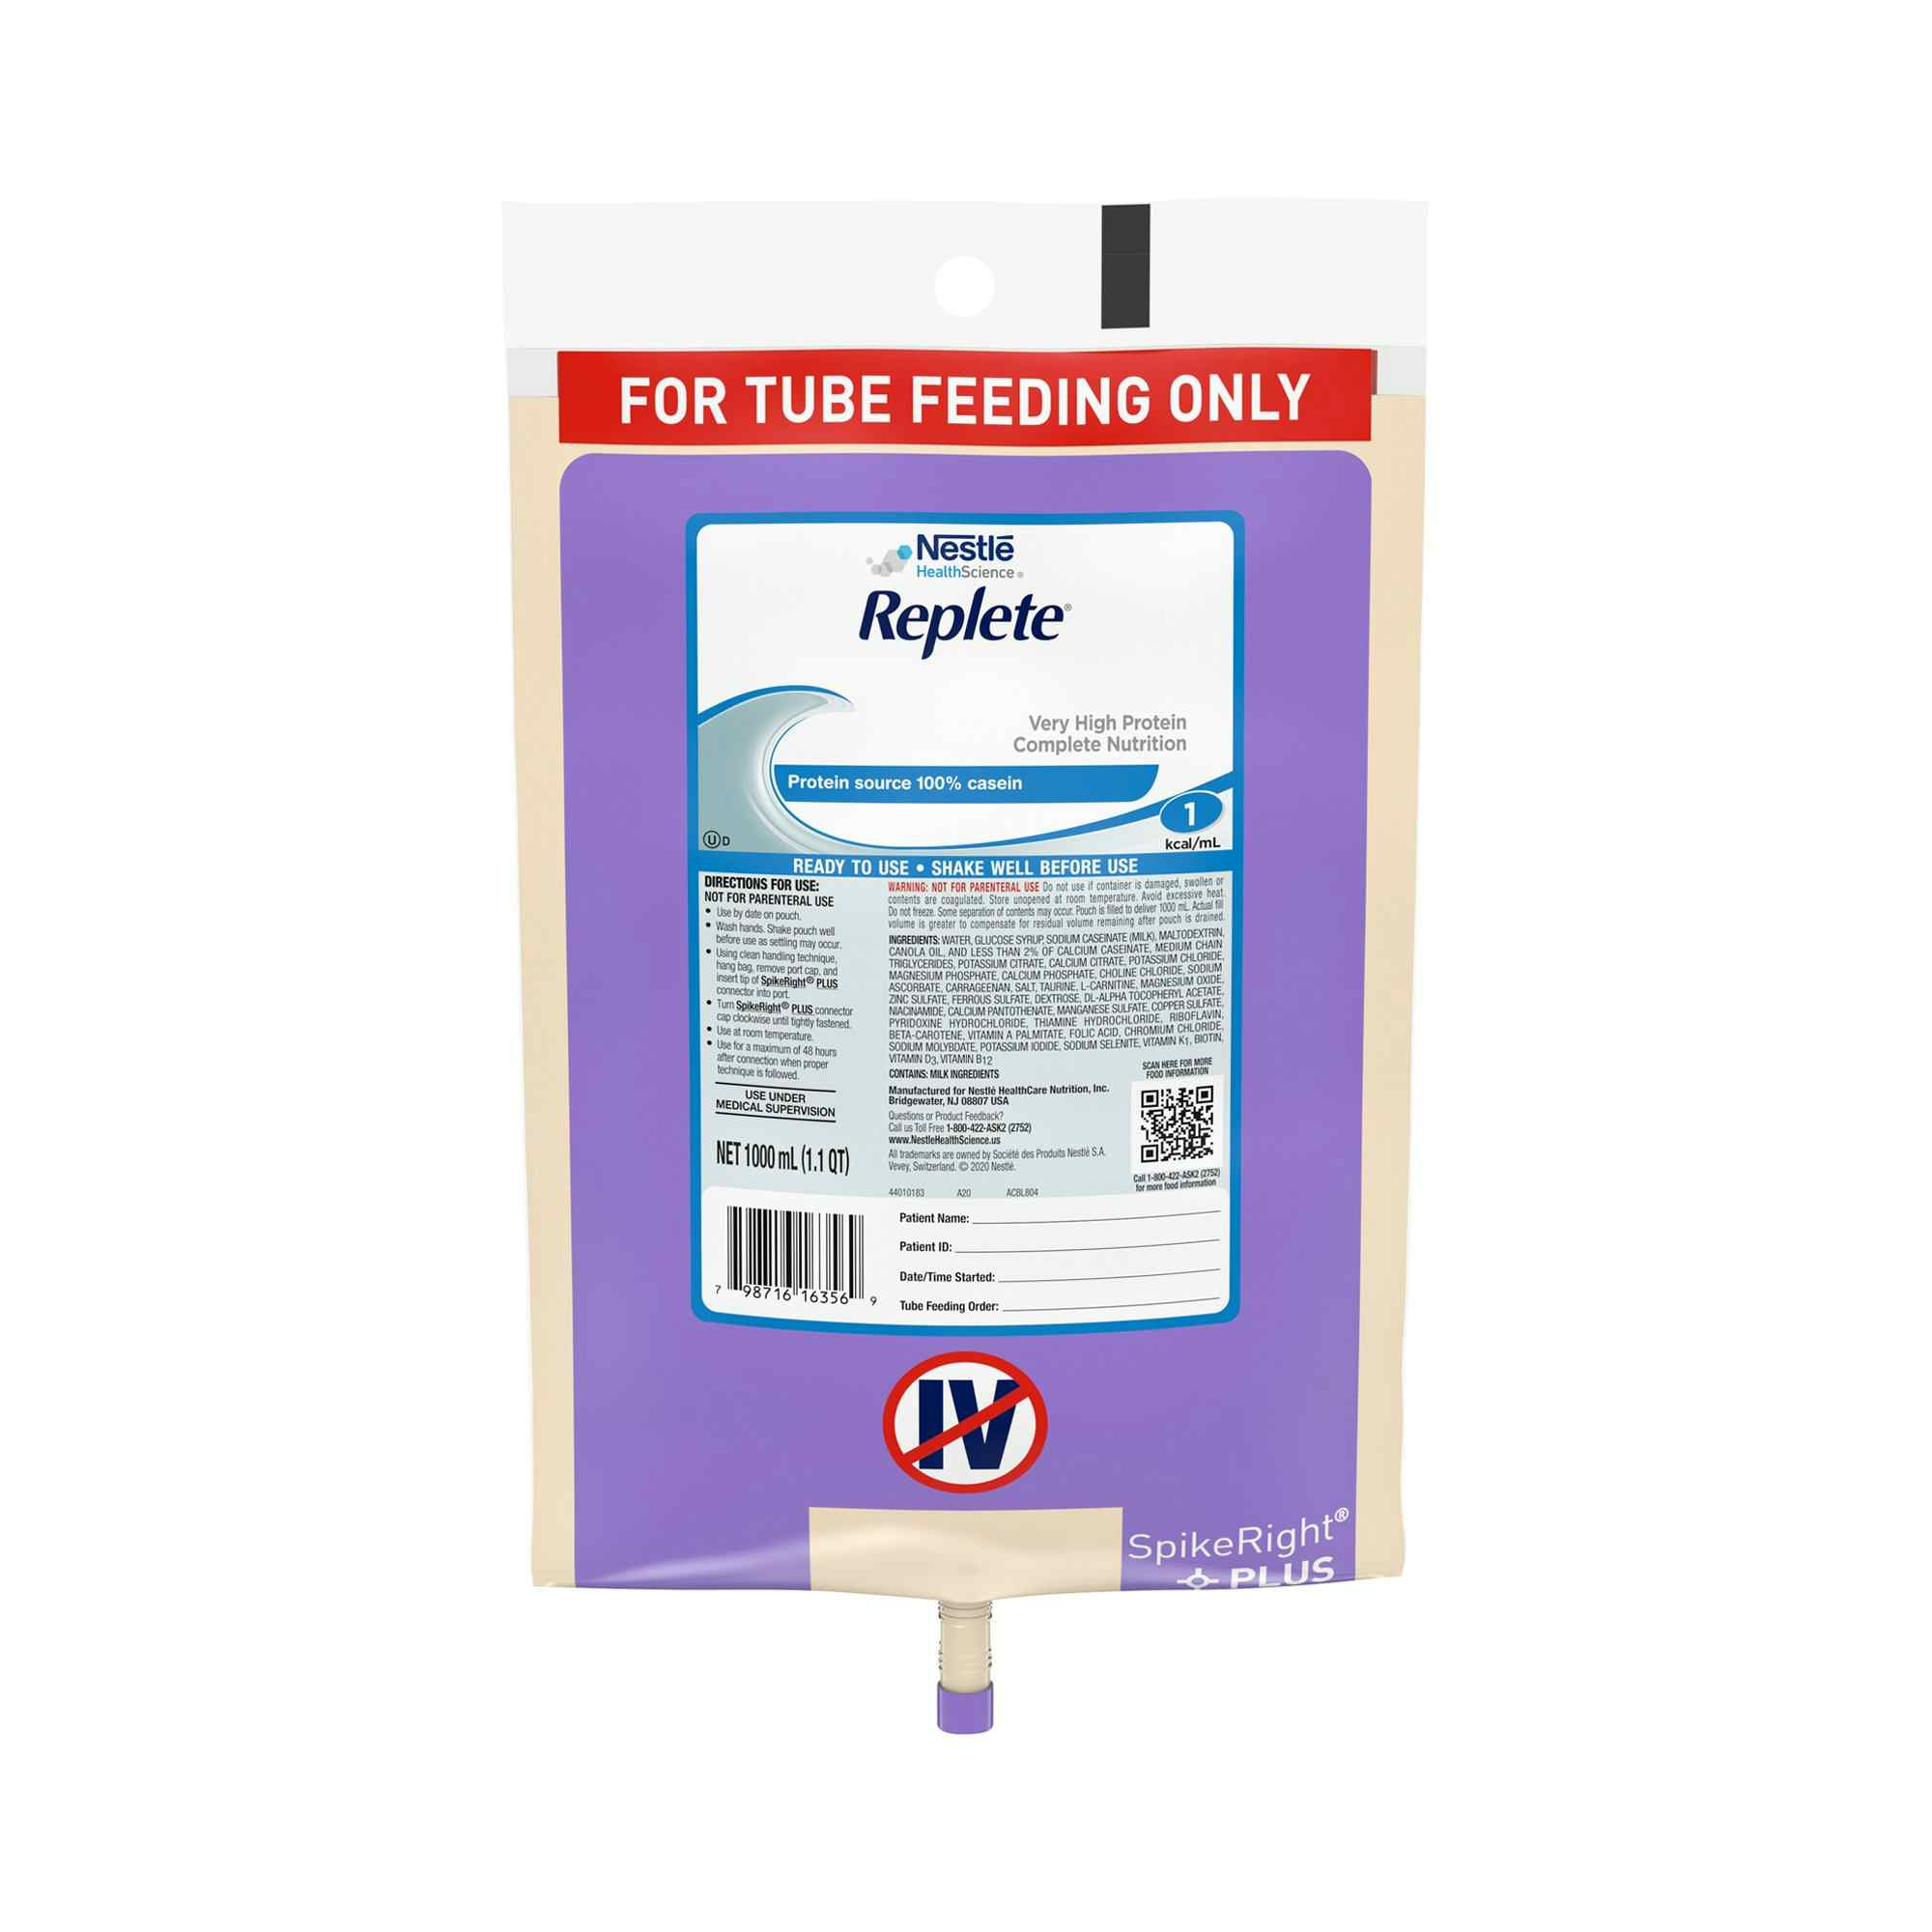 Nestle HealthScience Replete Very High Protein Complete Nutrition Tube Feeding Formula, 33.8 oz. , 10798716263563, Case of 6